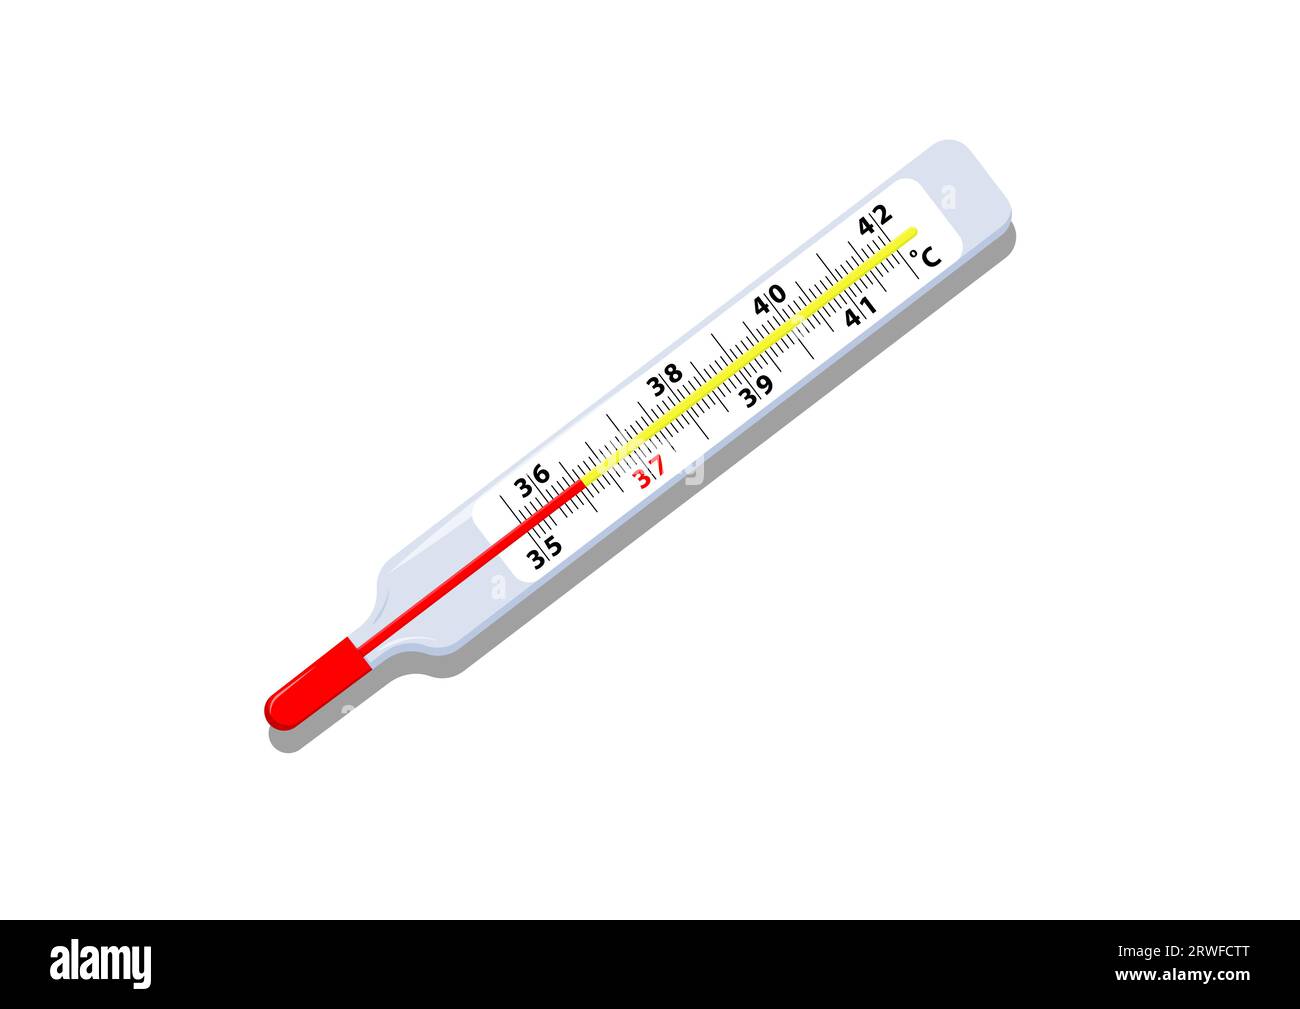 Medical Thermometer Cartoon Vector Flat Design Isolated on White Background Stock Vector